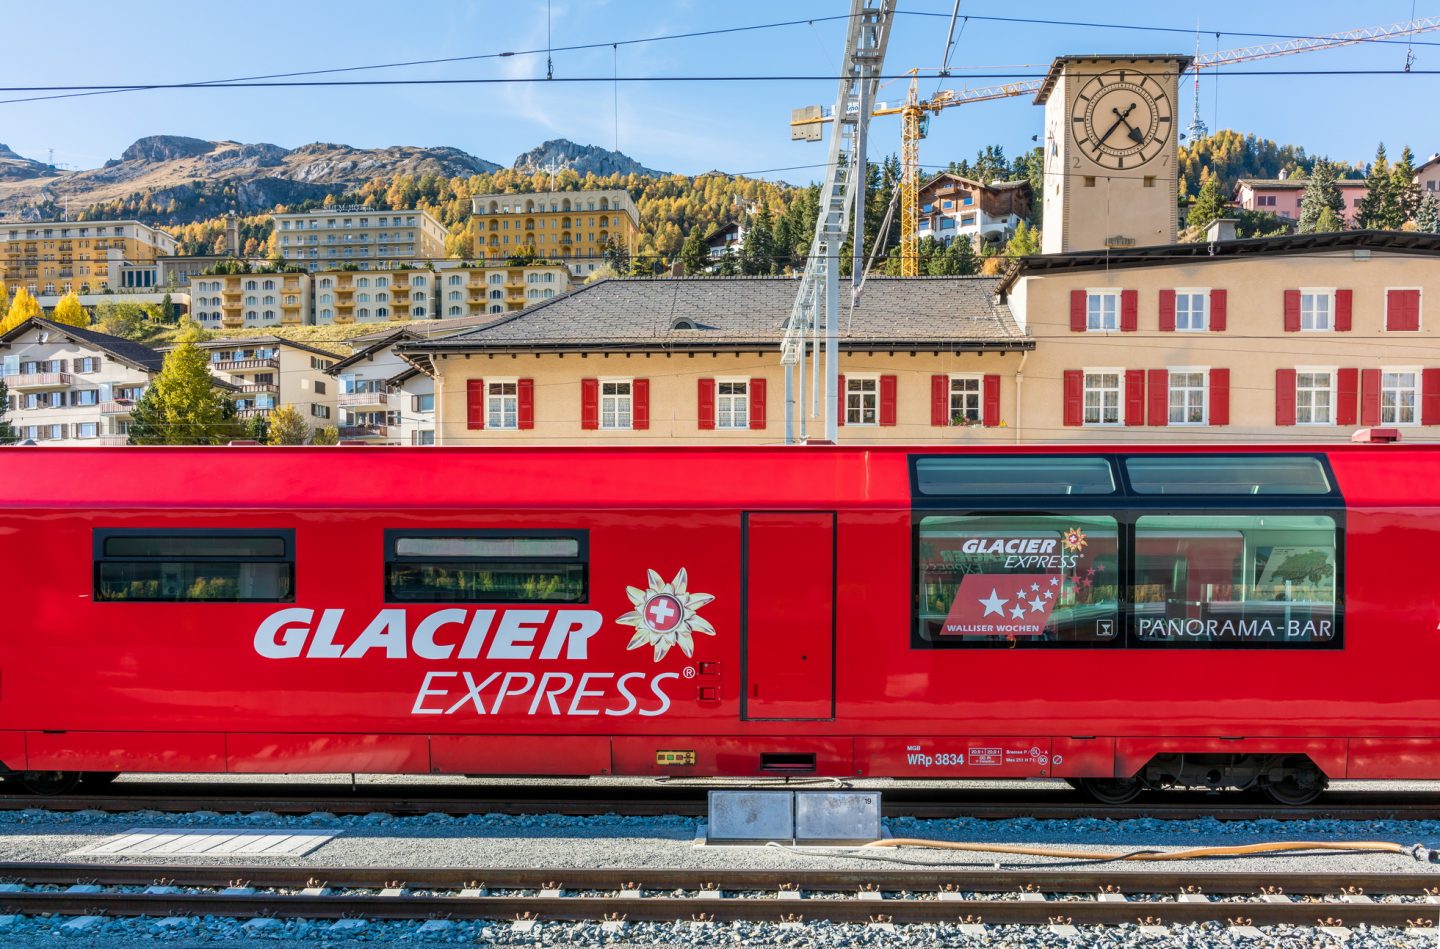 Glacier Express at the station in St. Moritz on its way to Zermatt.